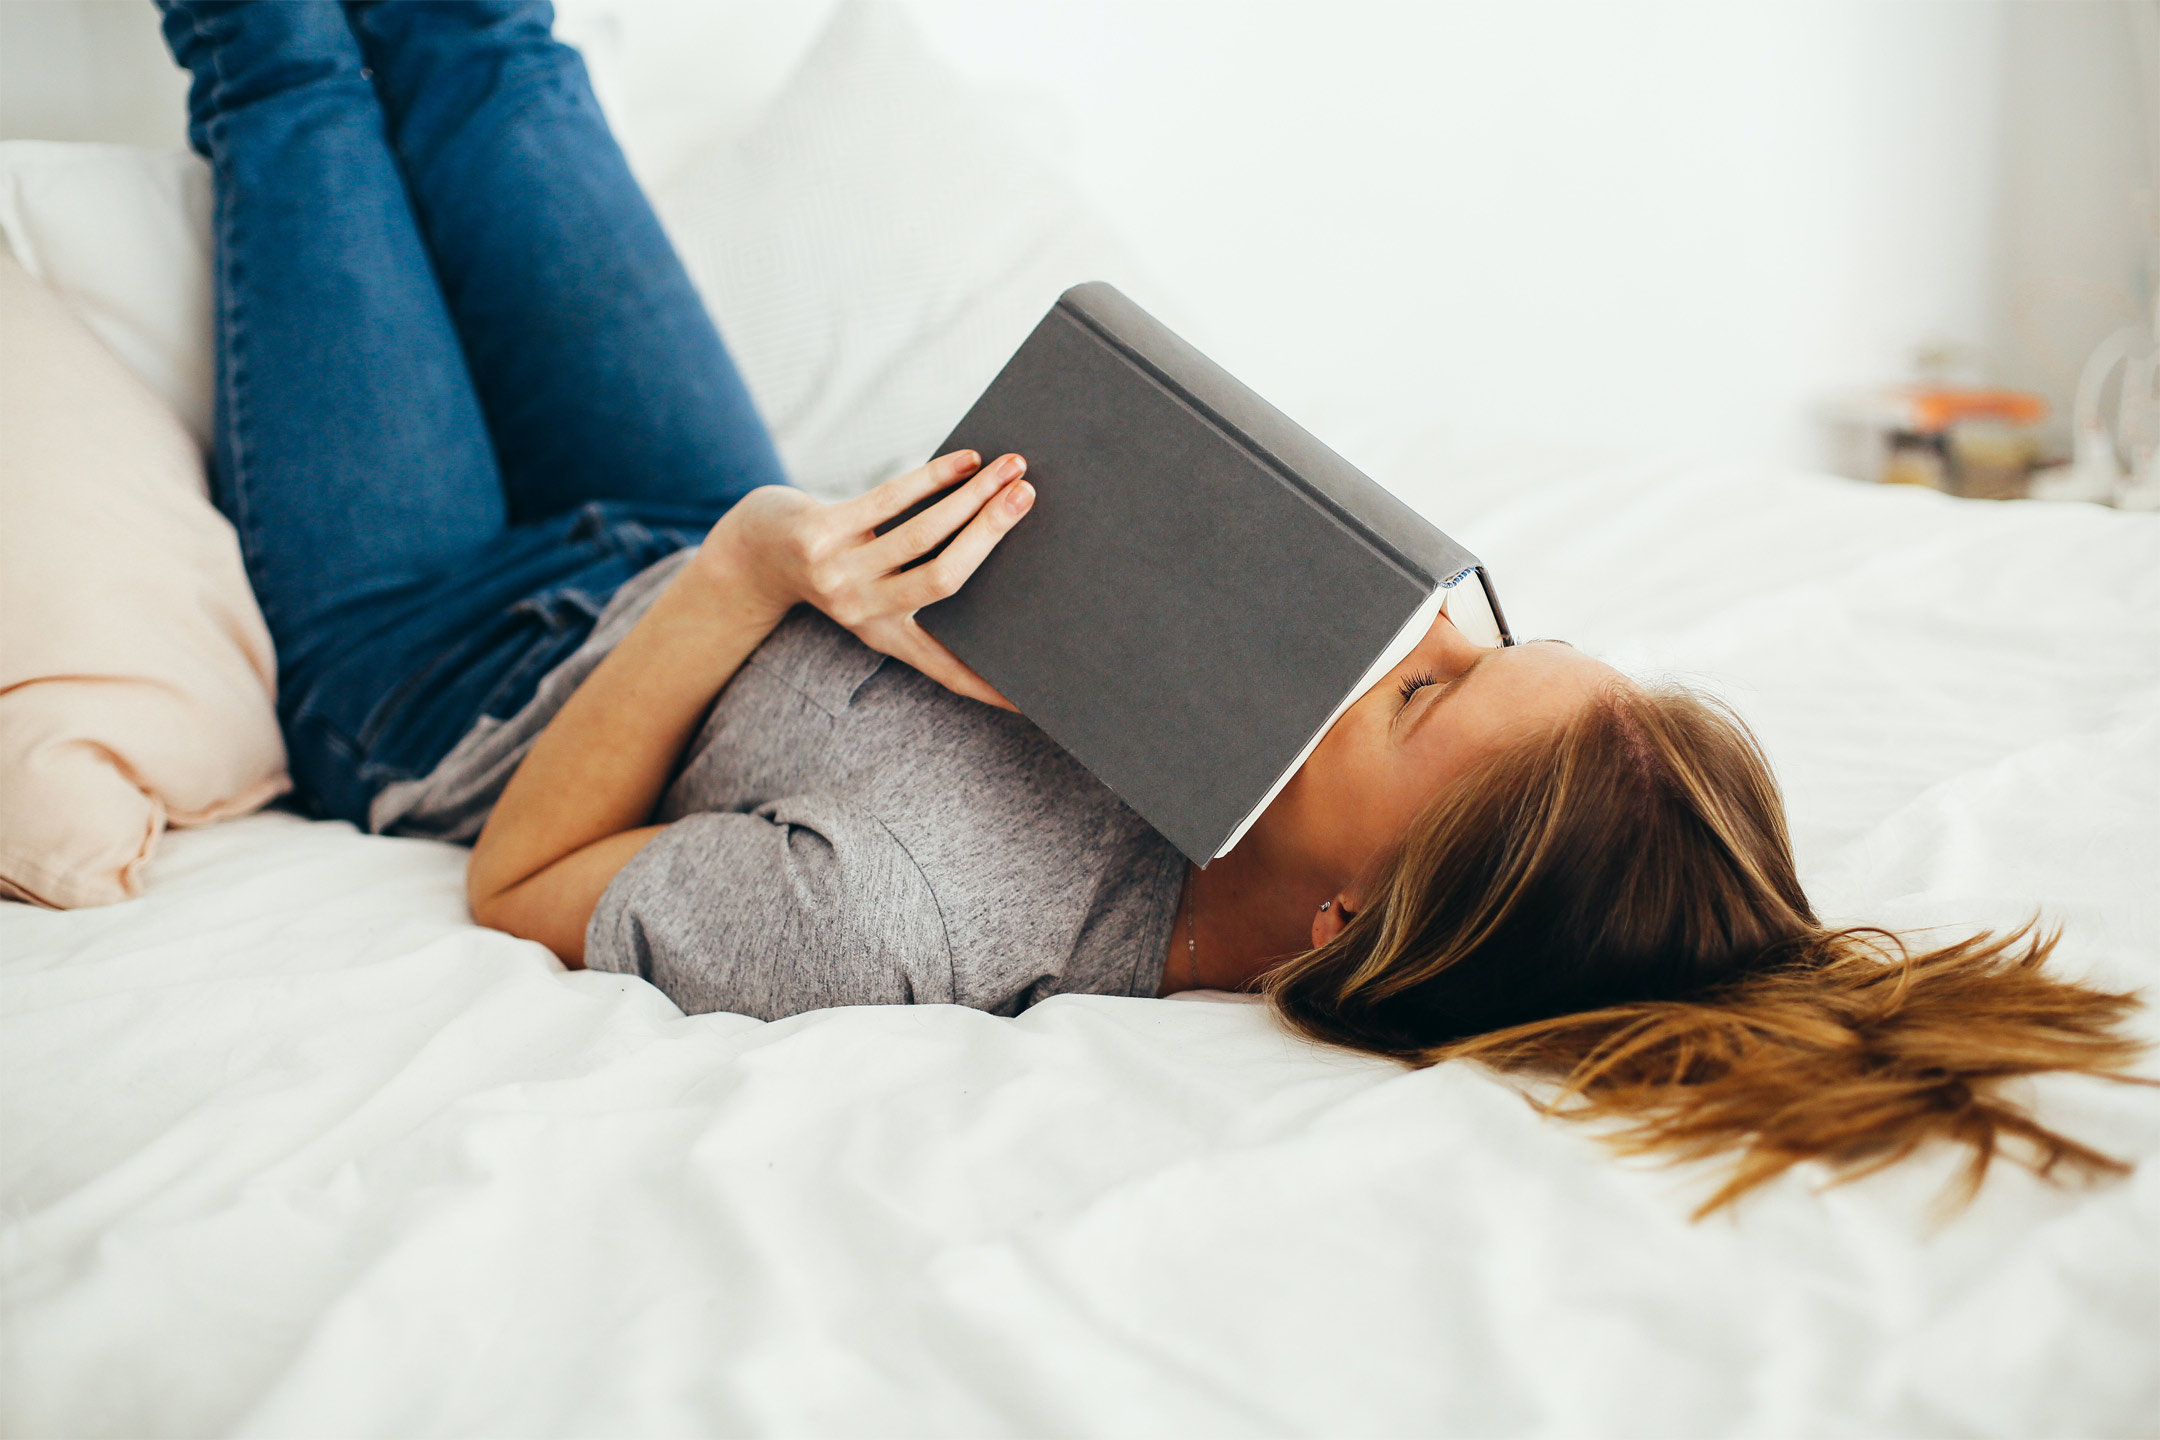 teen-reading-a-book-in-bed-sad2160